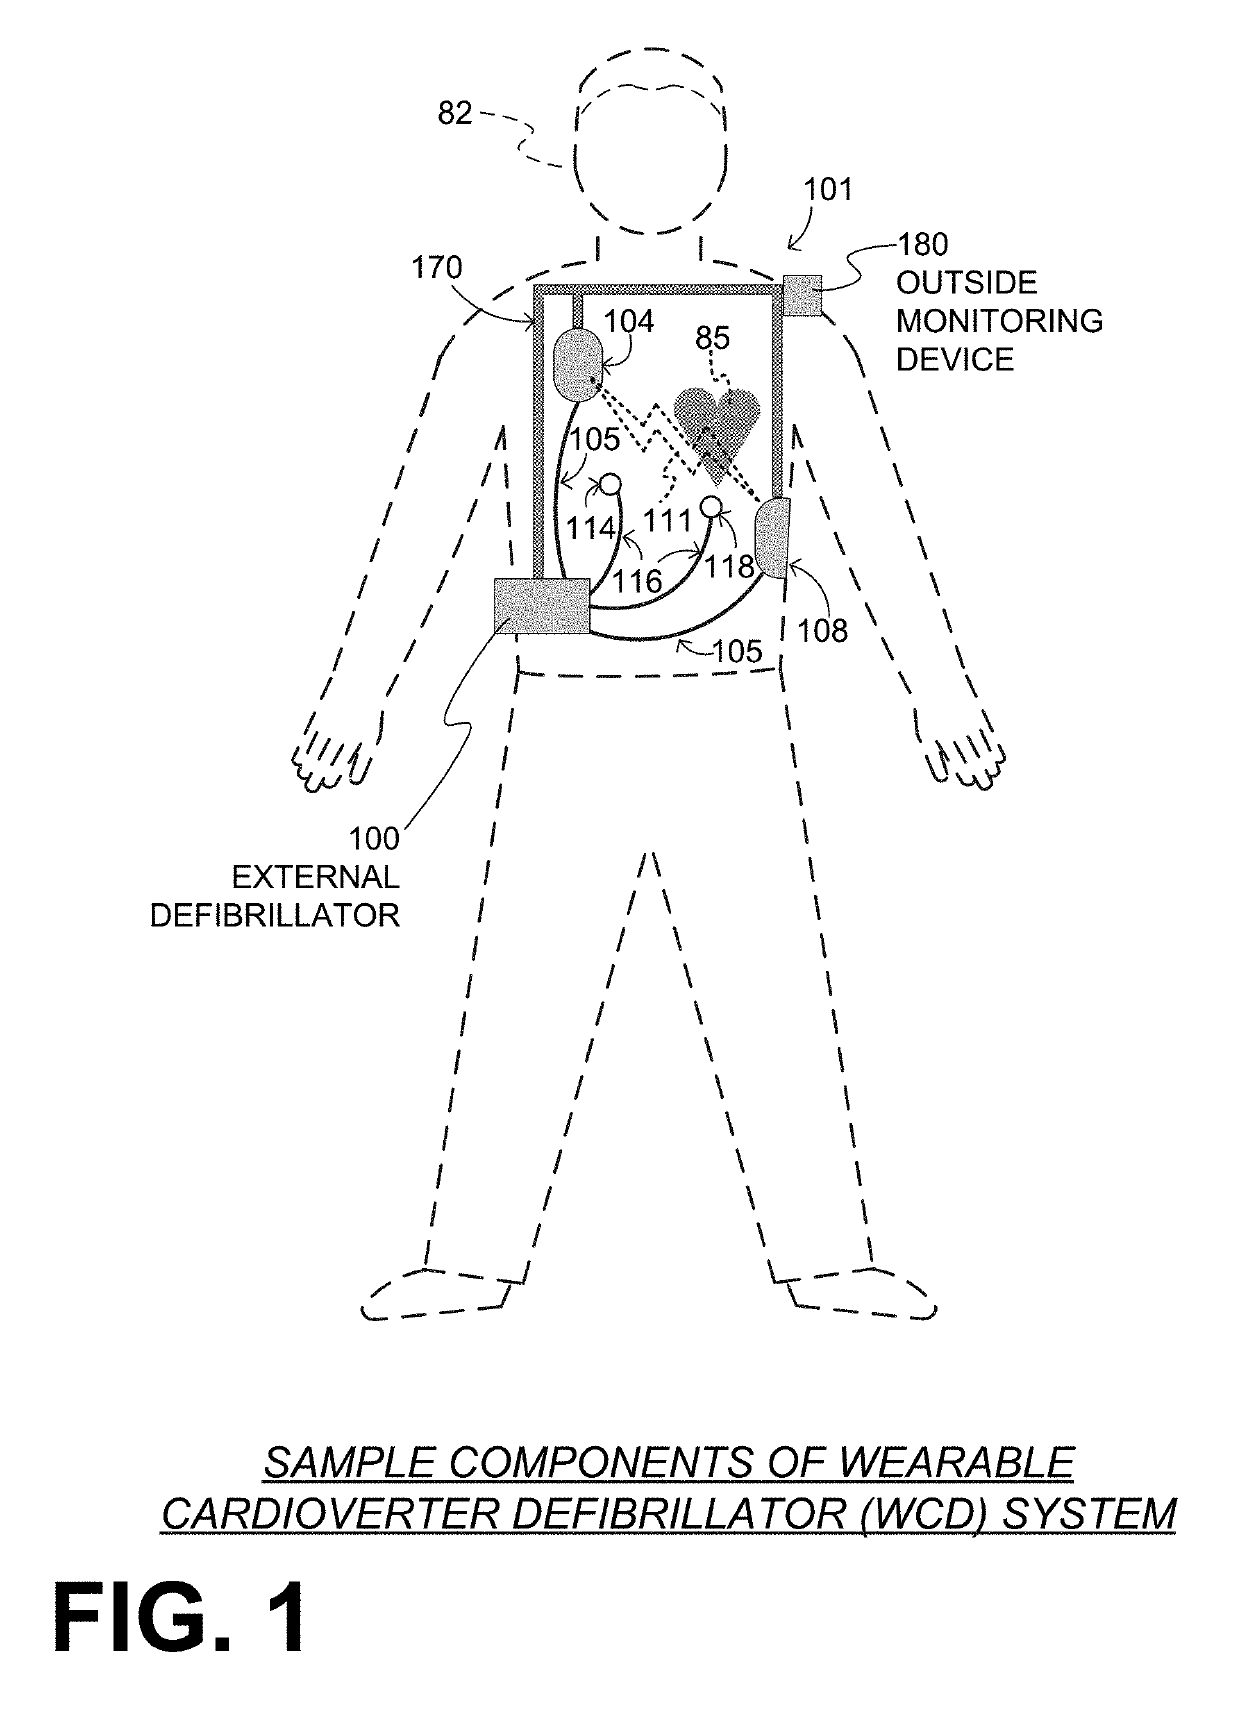 Wearable cardioverter defibrillator (WCD) system with isolated patient parameter component